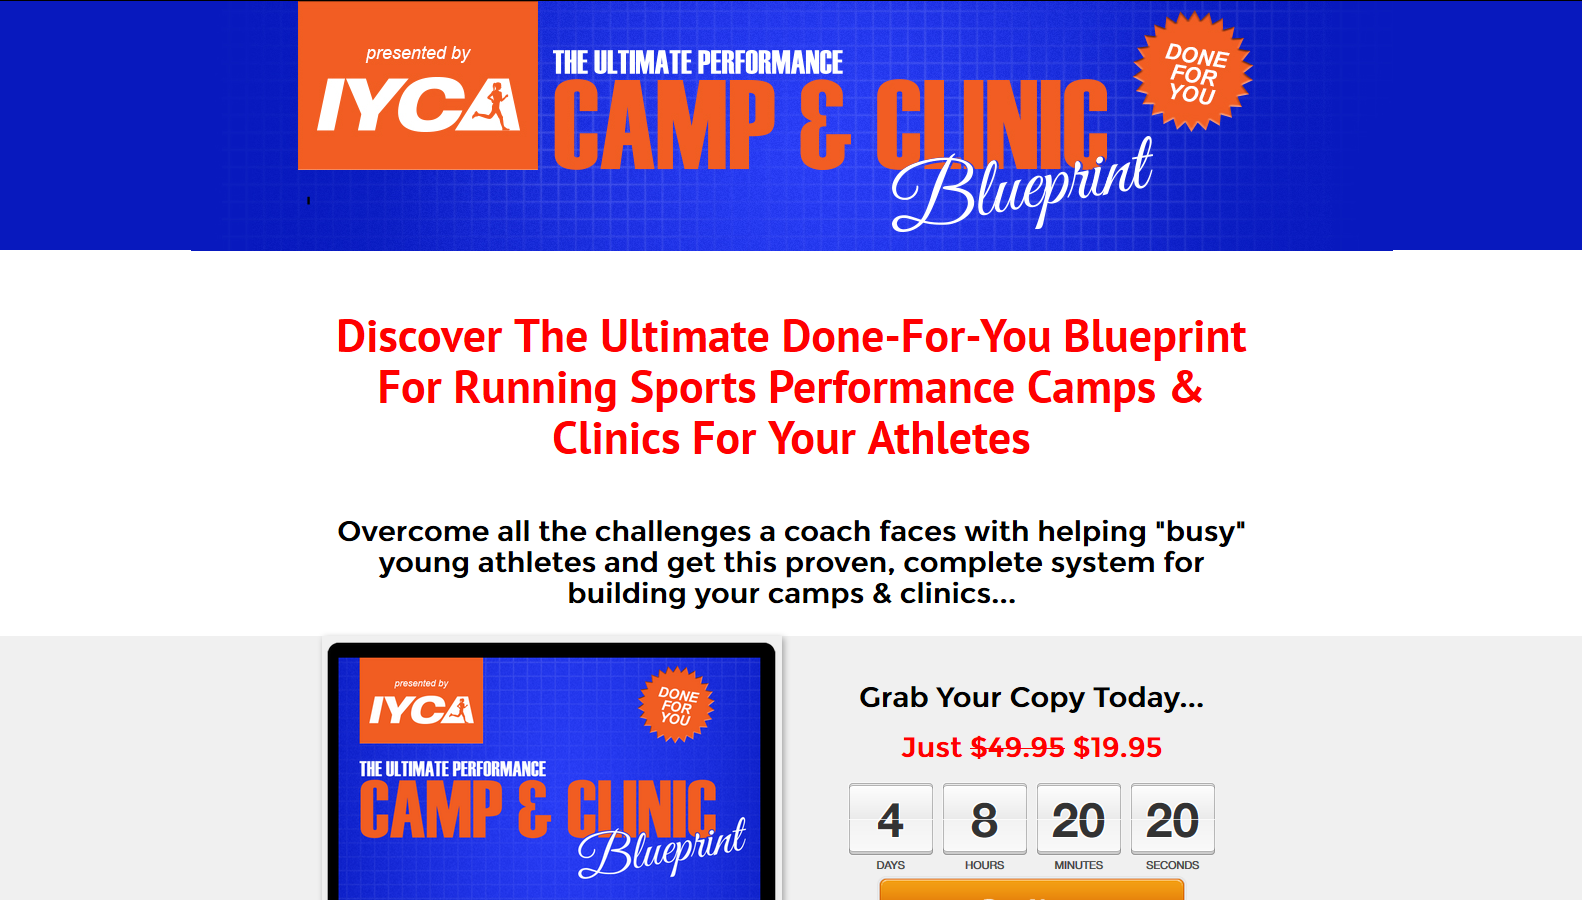 IYCA - Ultimate Performance Camp & Clinic Blueprint